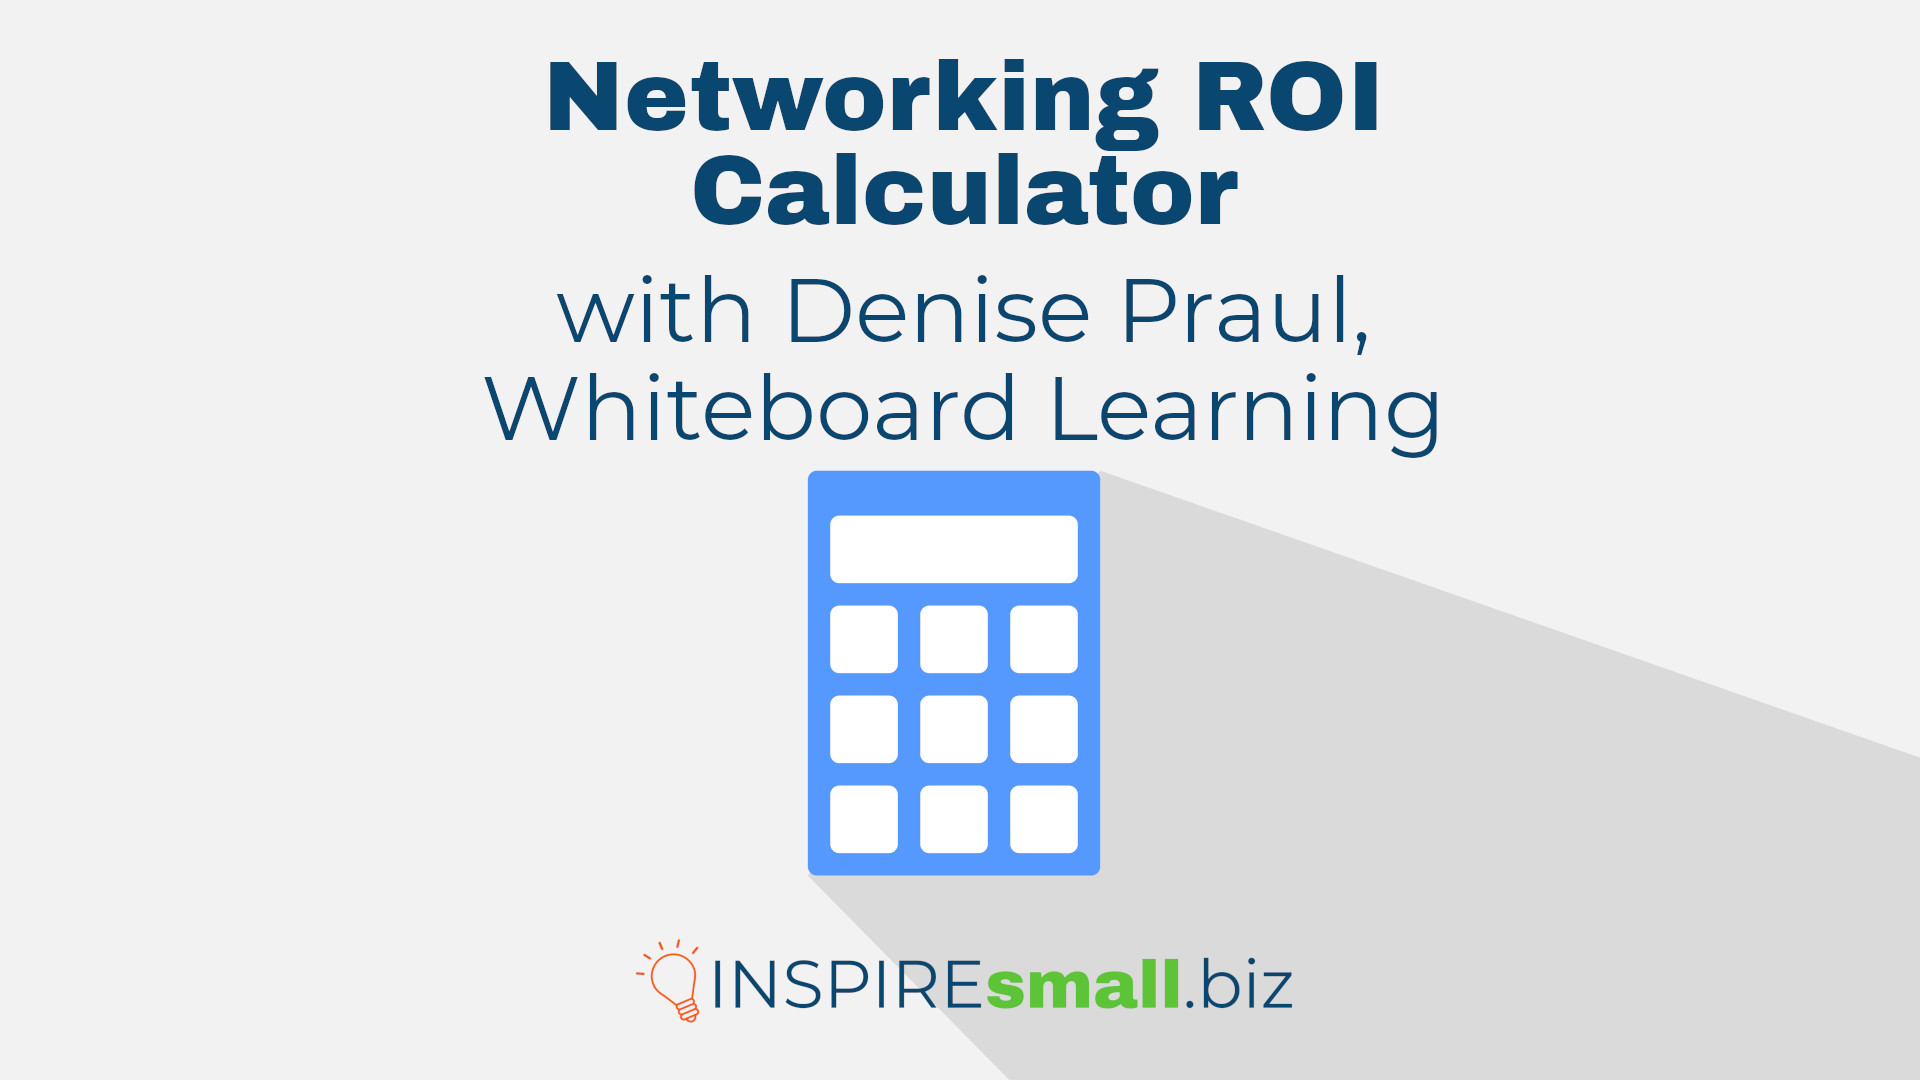 Blue calculator over gray background. Blue text reads, Networking ROI Calculator with Denise Praul, Whiteboard Learning. Hosted by INSPIREsmall.biz